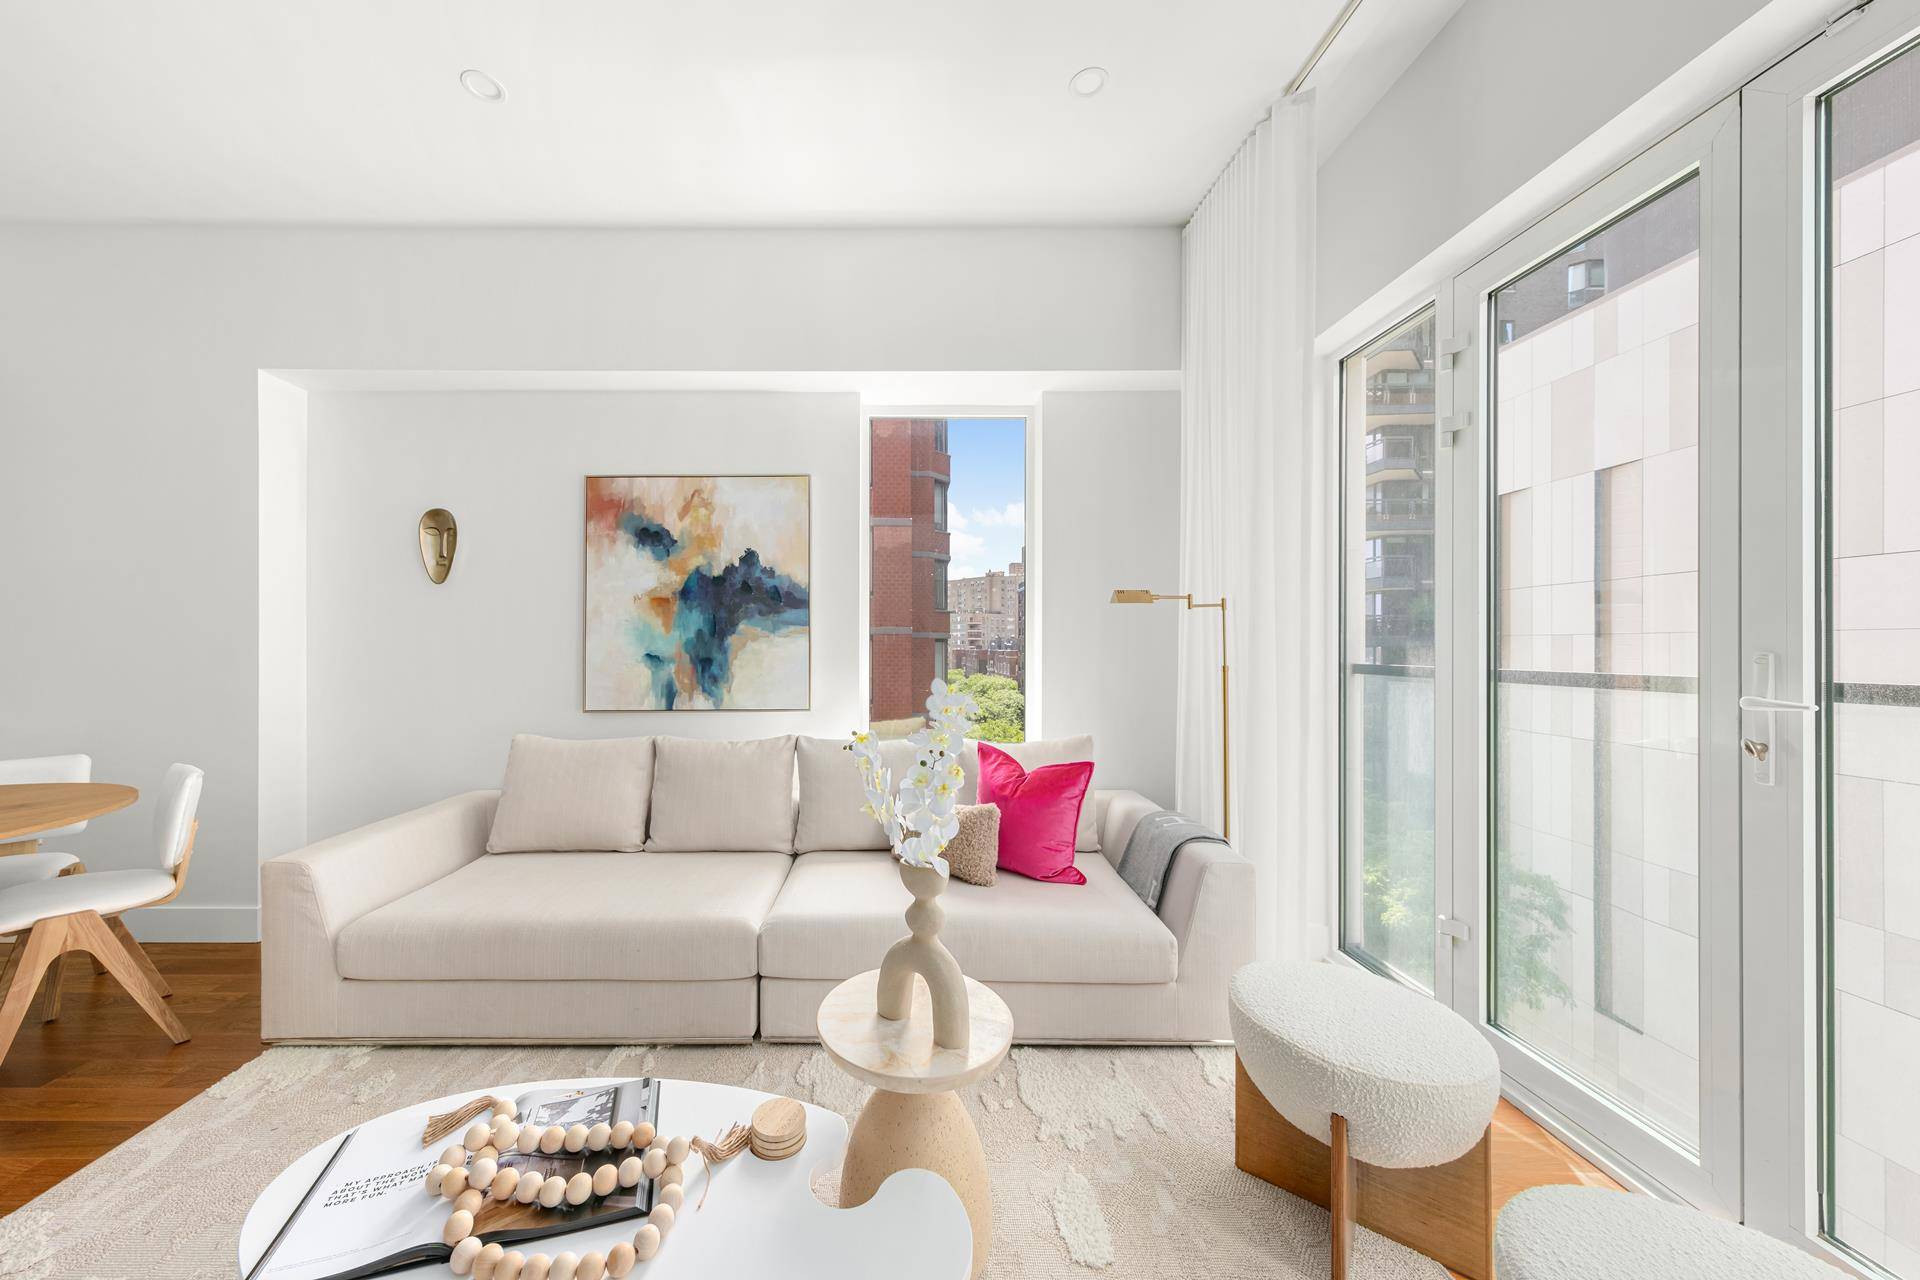 FOR A LIMITED TIME GET 47, 028 CREDIT AT CLOSING, WHICH INCLUDES 1 YEAR OF COMMON CHARGES AND REAL ESTATE TAXES Introducing 6A at 427 E 90th Street A luminous ...